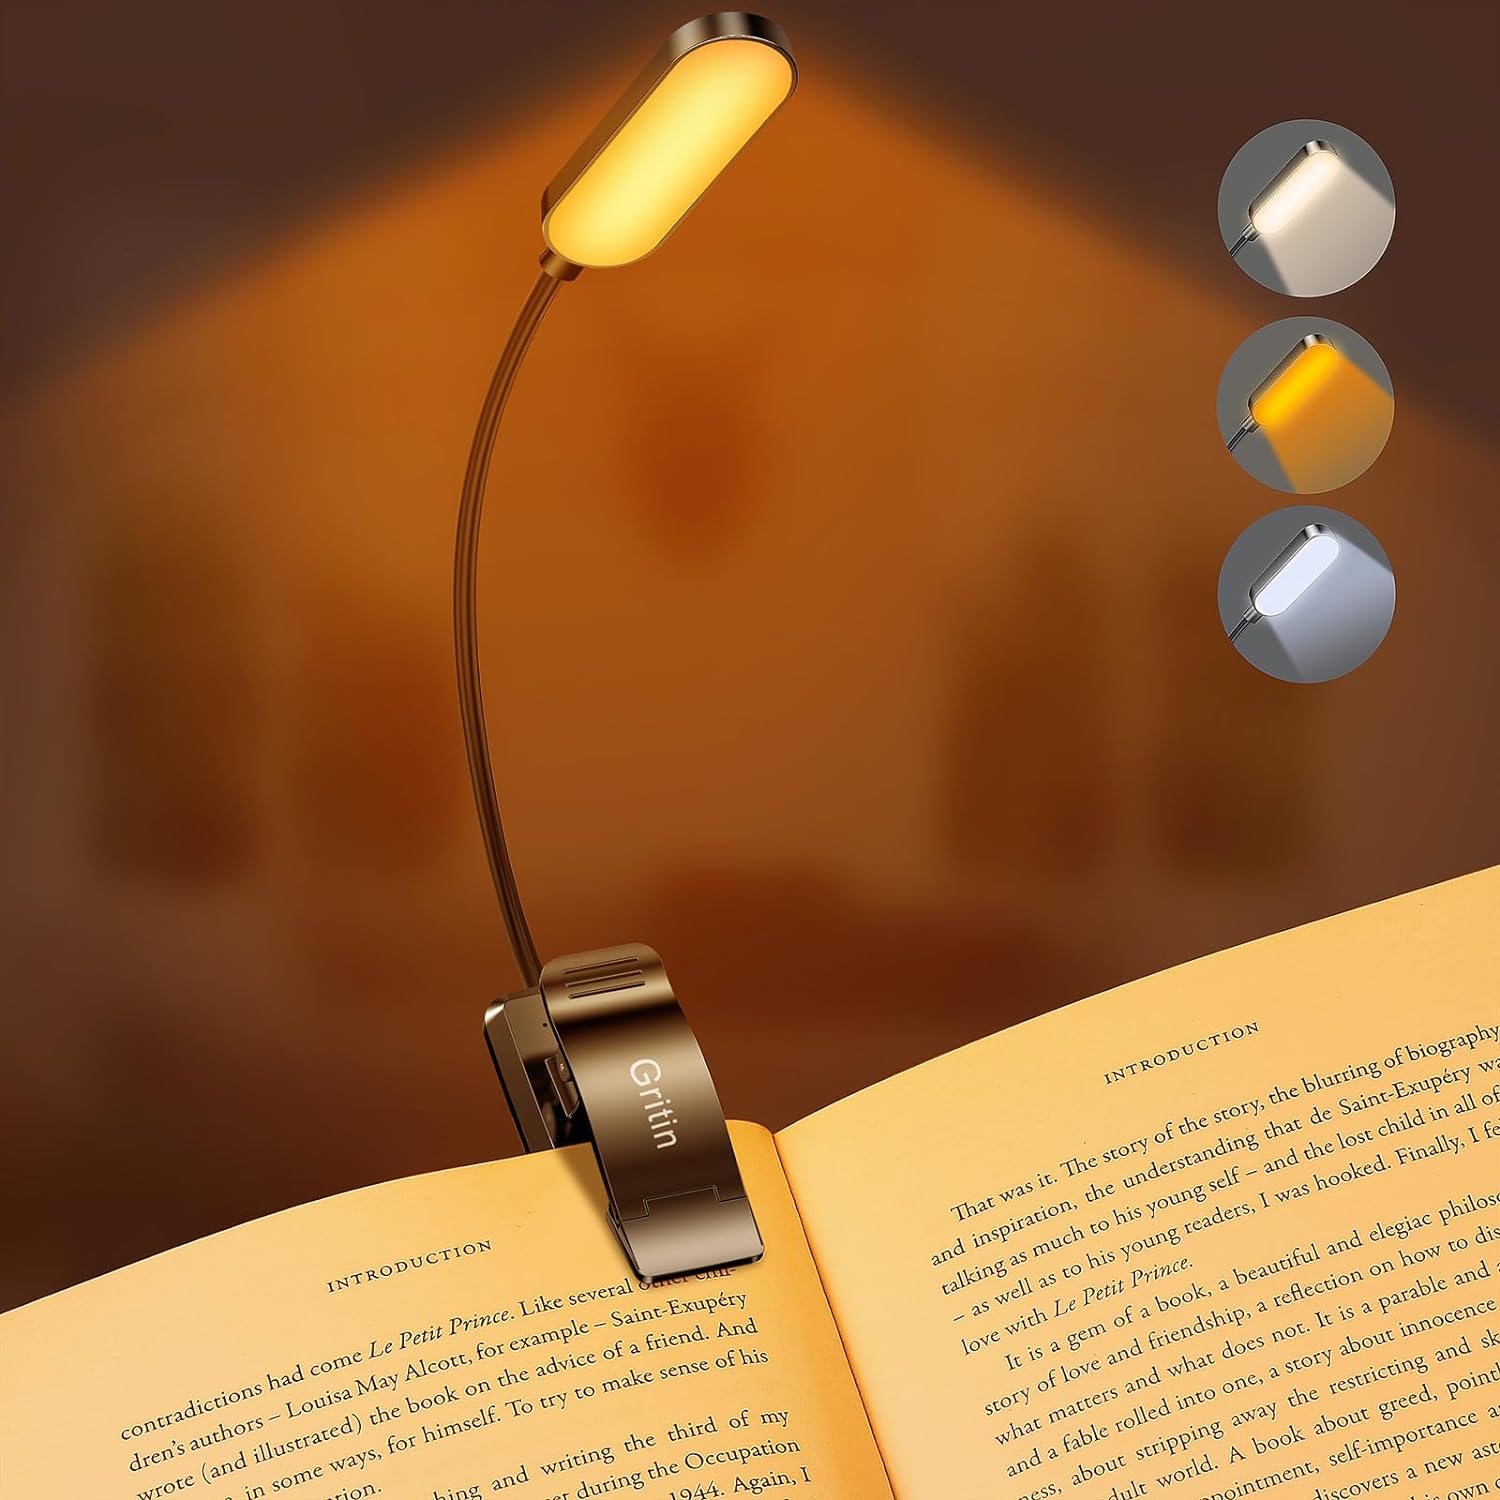 Gritin 16 LED Rechargeable Book Light for Reading in Bed